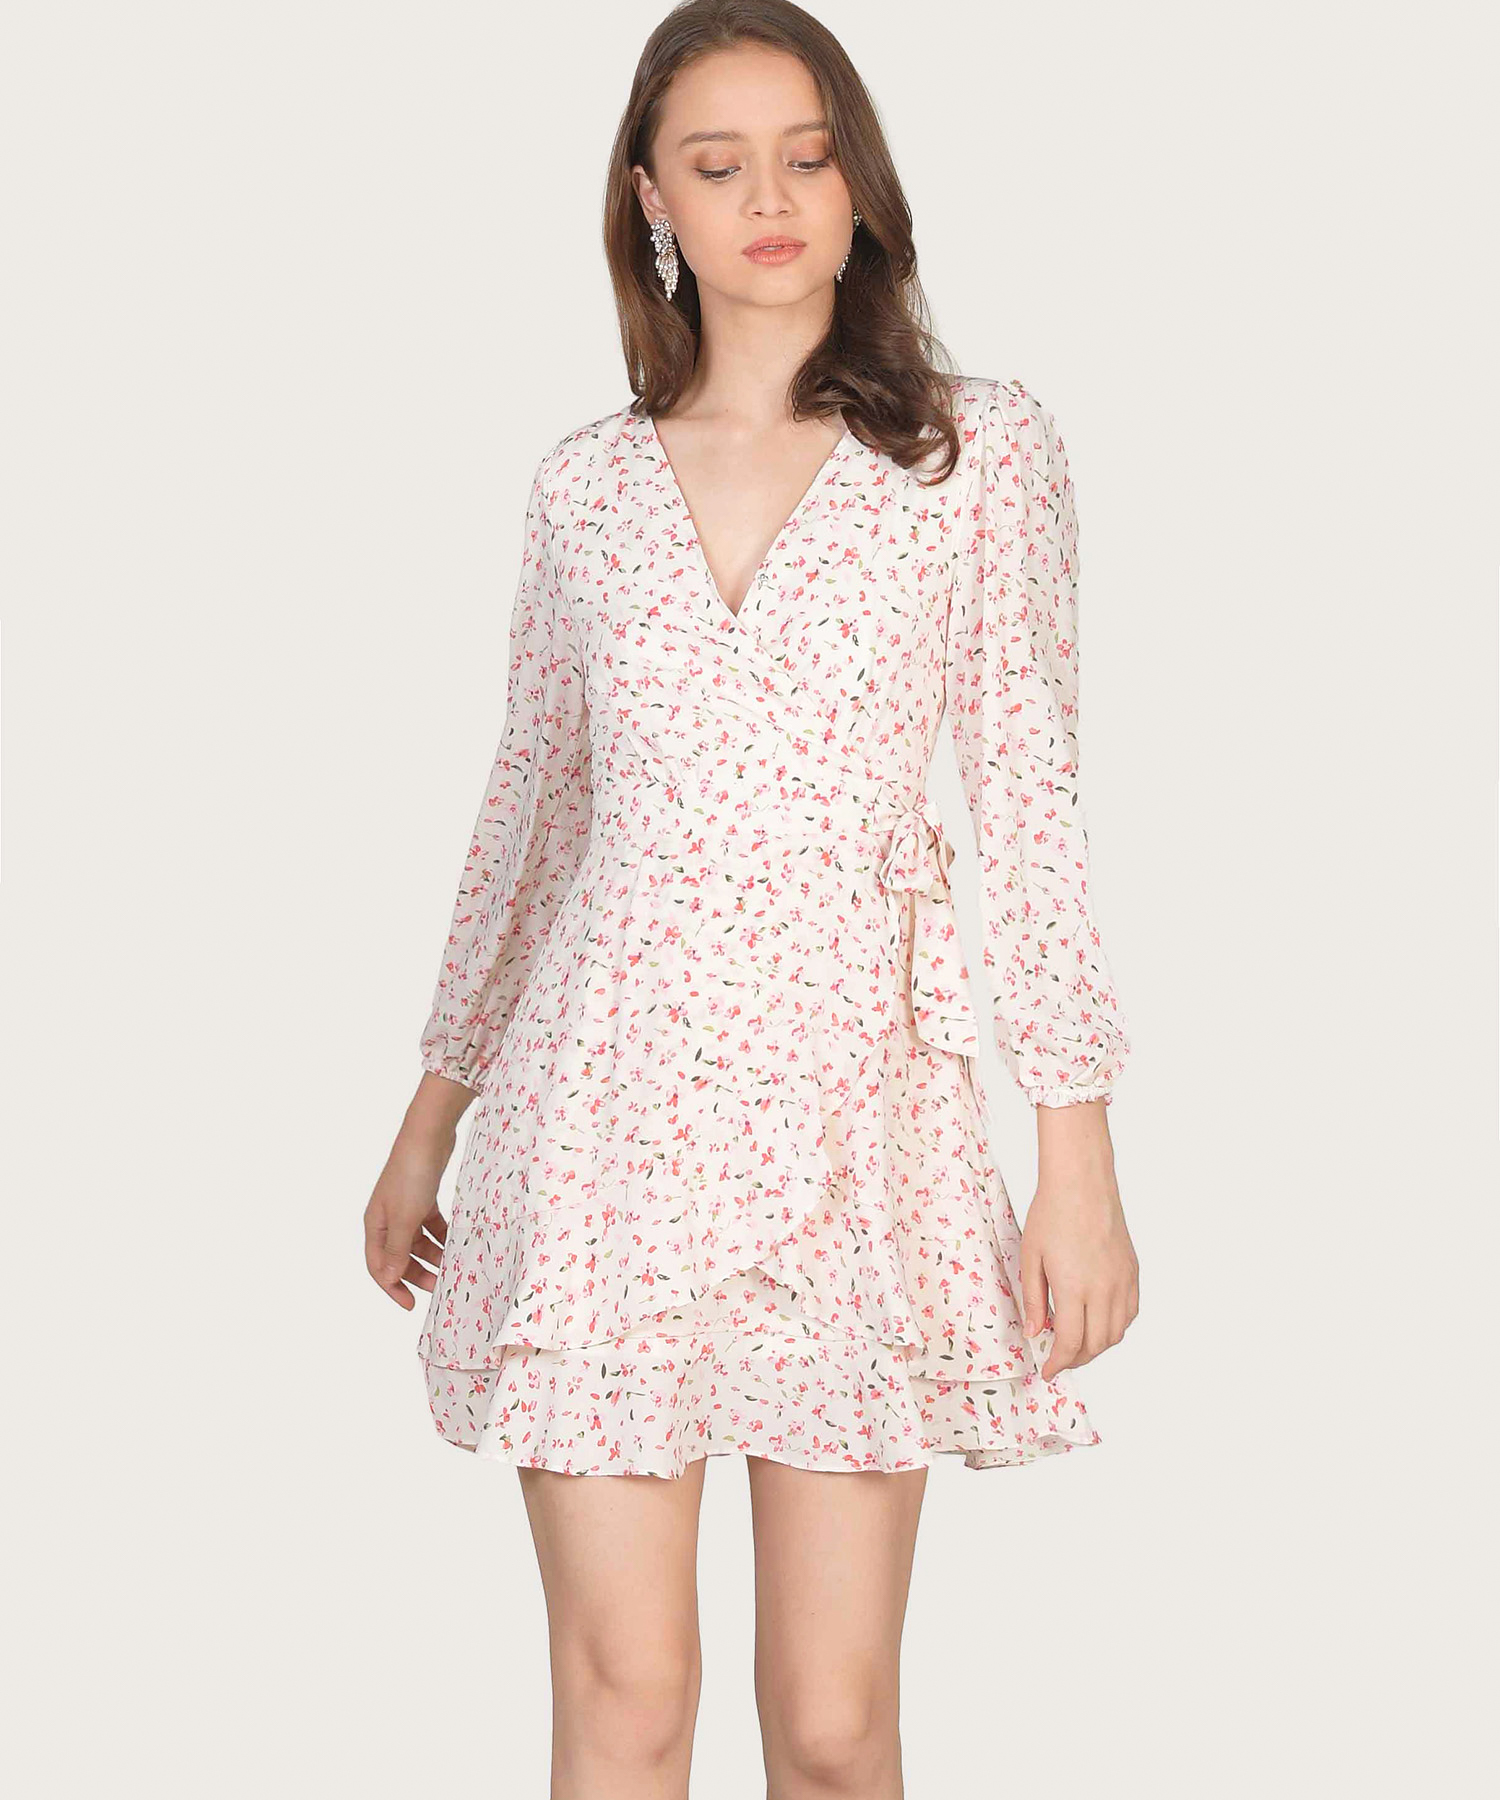 claudina-floral-overlay-dress-off-white